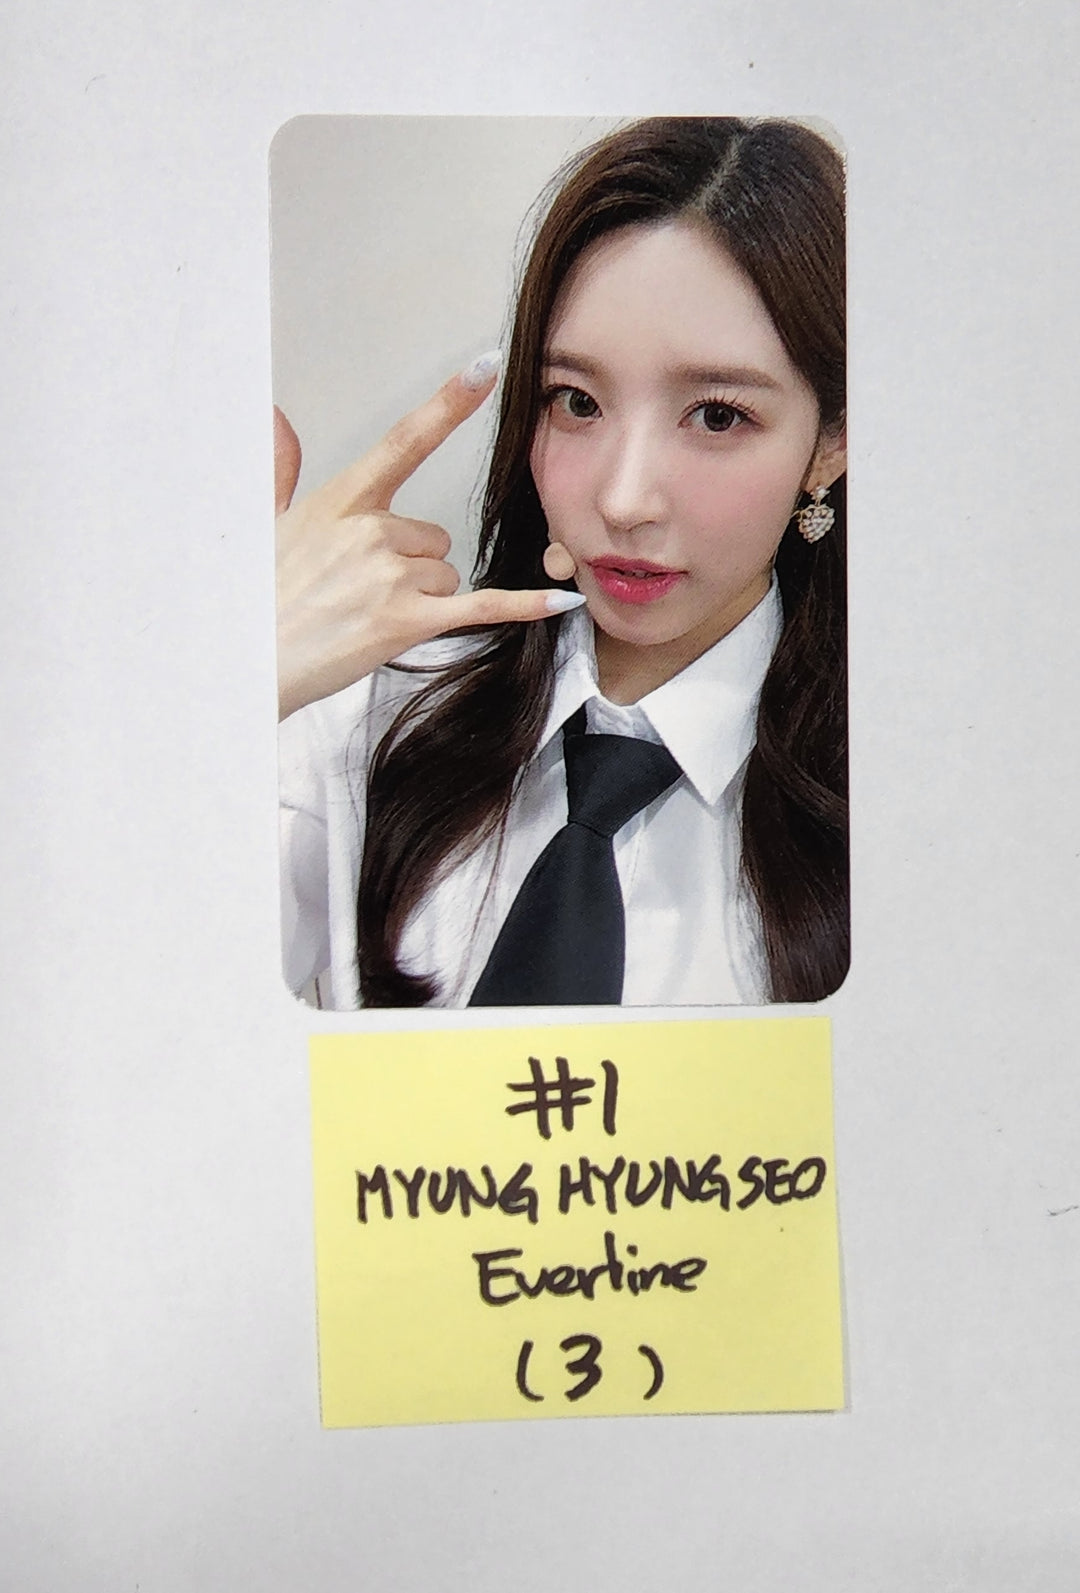 CLASS:y "CLASS IS OVER" - Everline Fansign Event Photocard